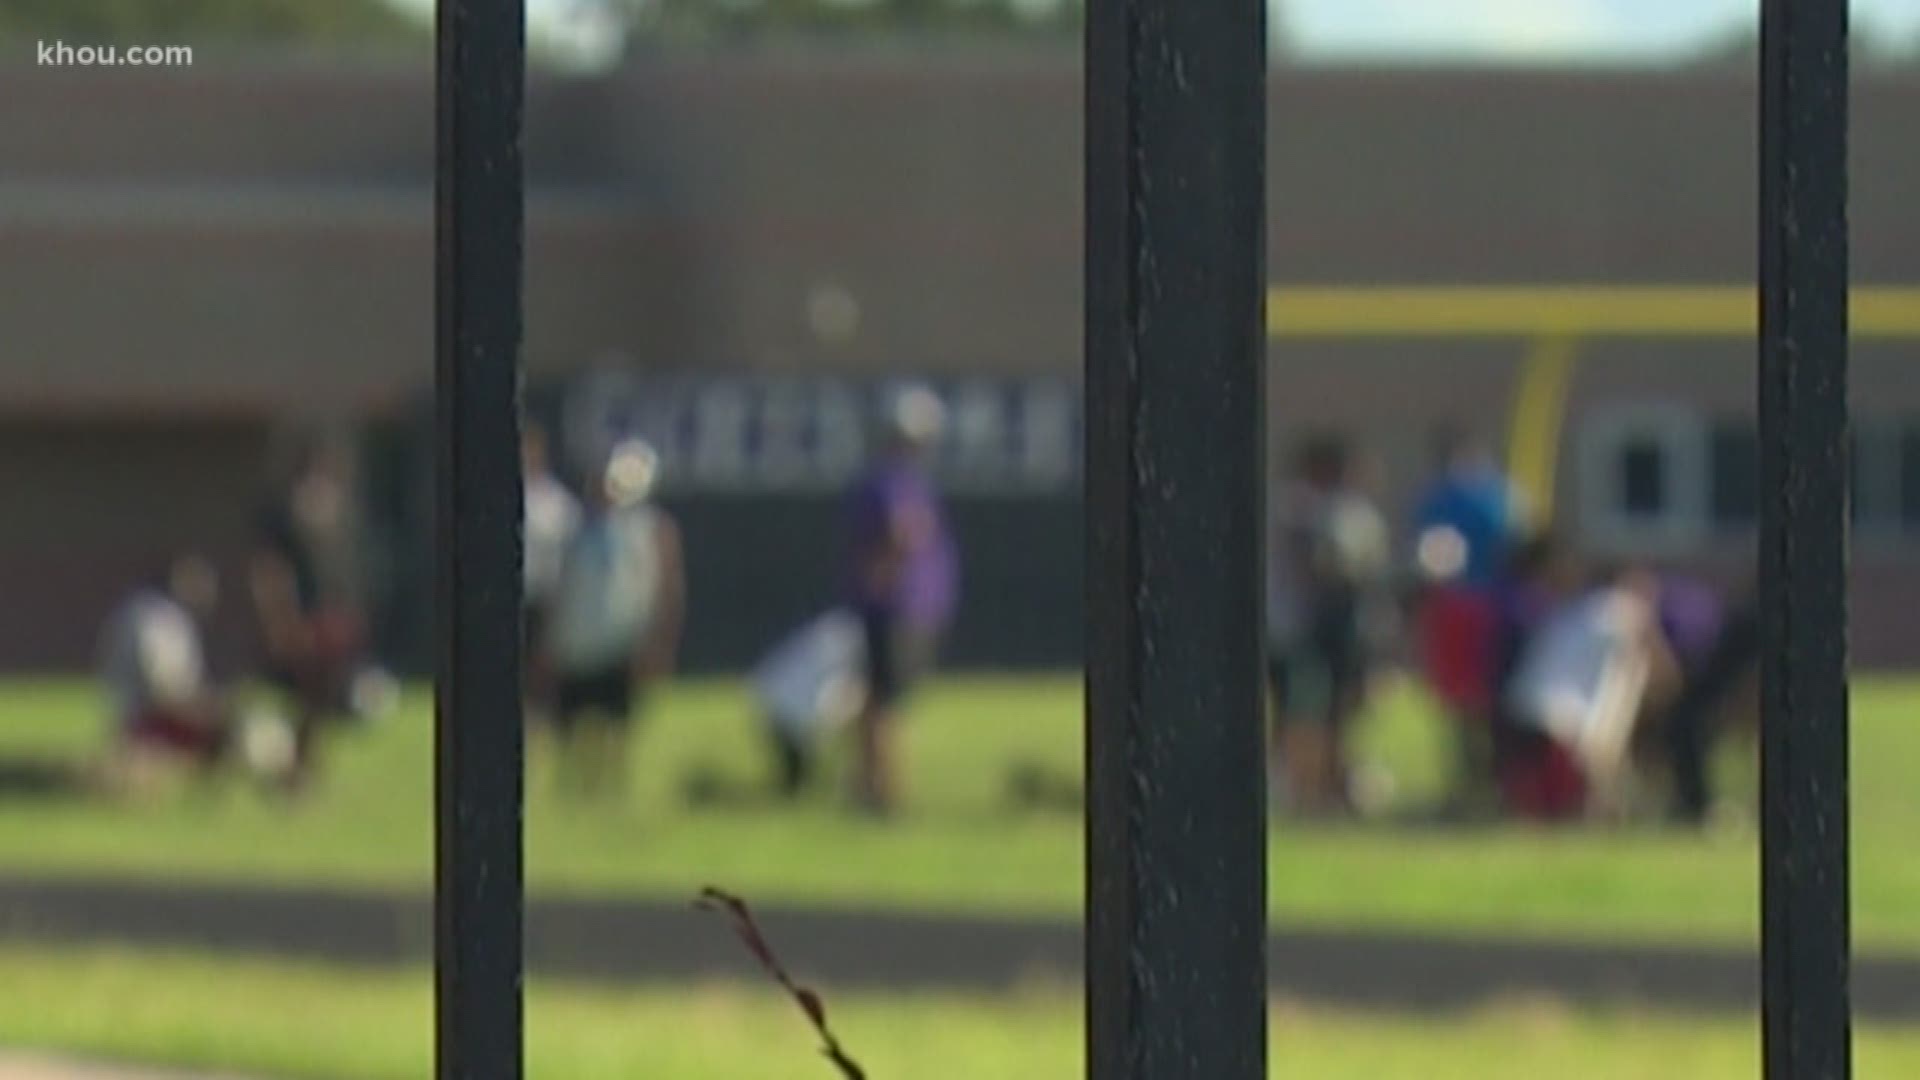 Keeping troubled youth out of jail by getting them help in school is the goal of a first-of-its-kind program being used by schools in Houston.